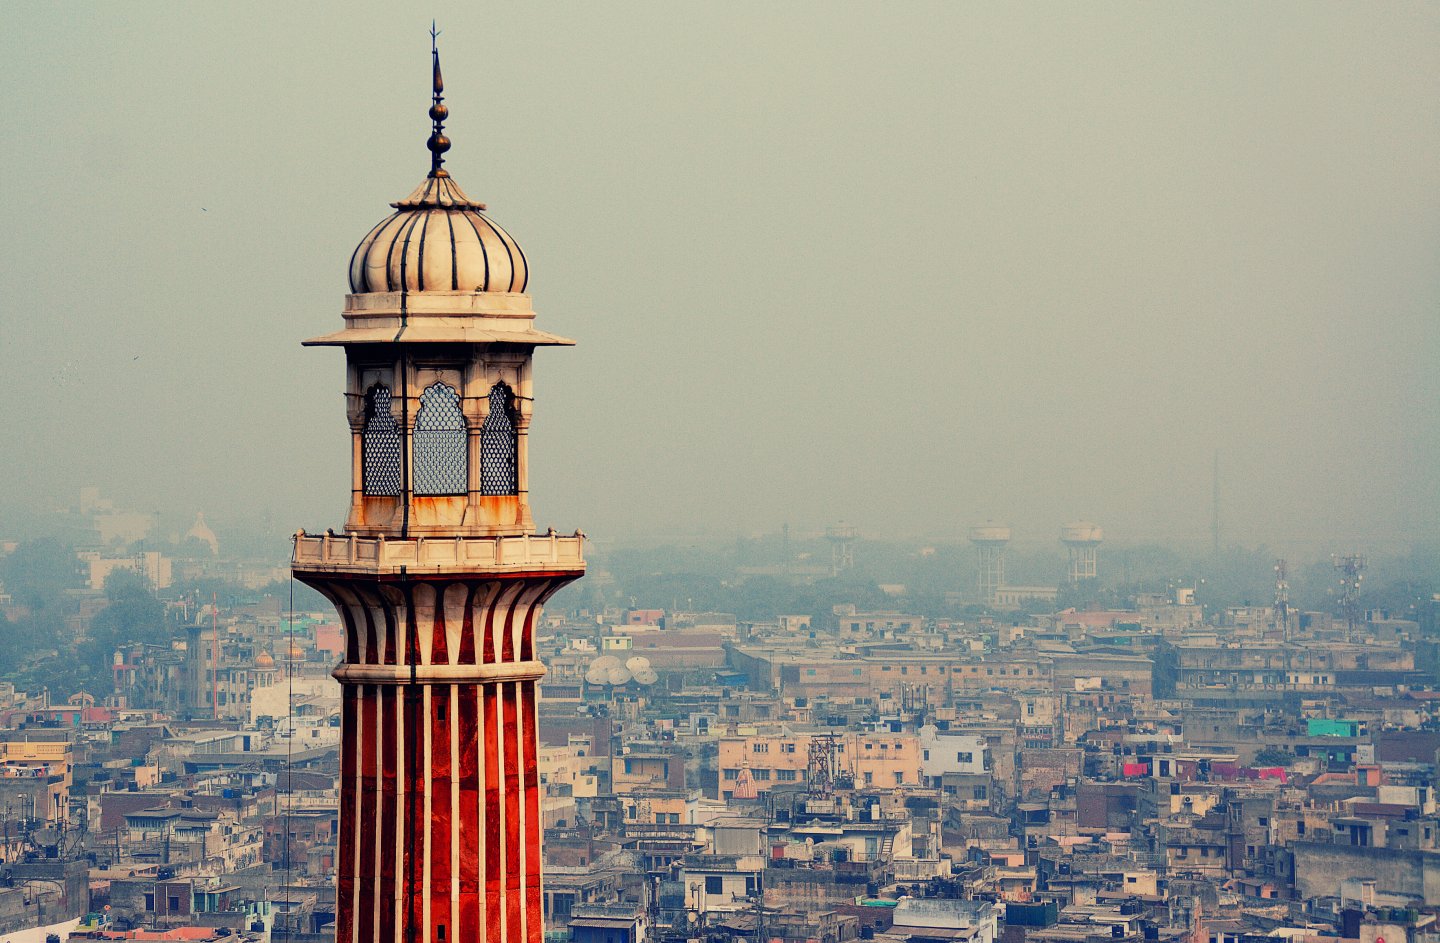 Festivities, Holidays and Traditions in New Delhi - Bautrip